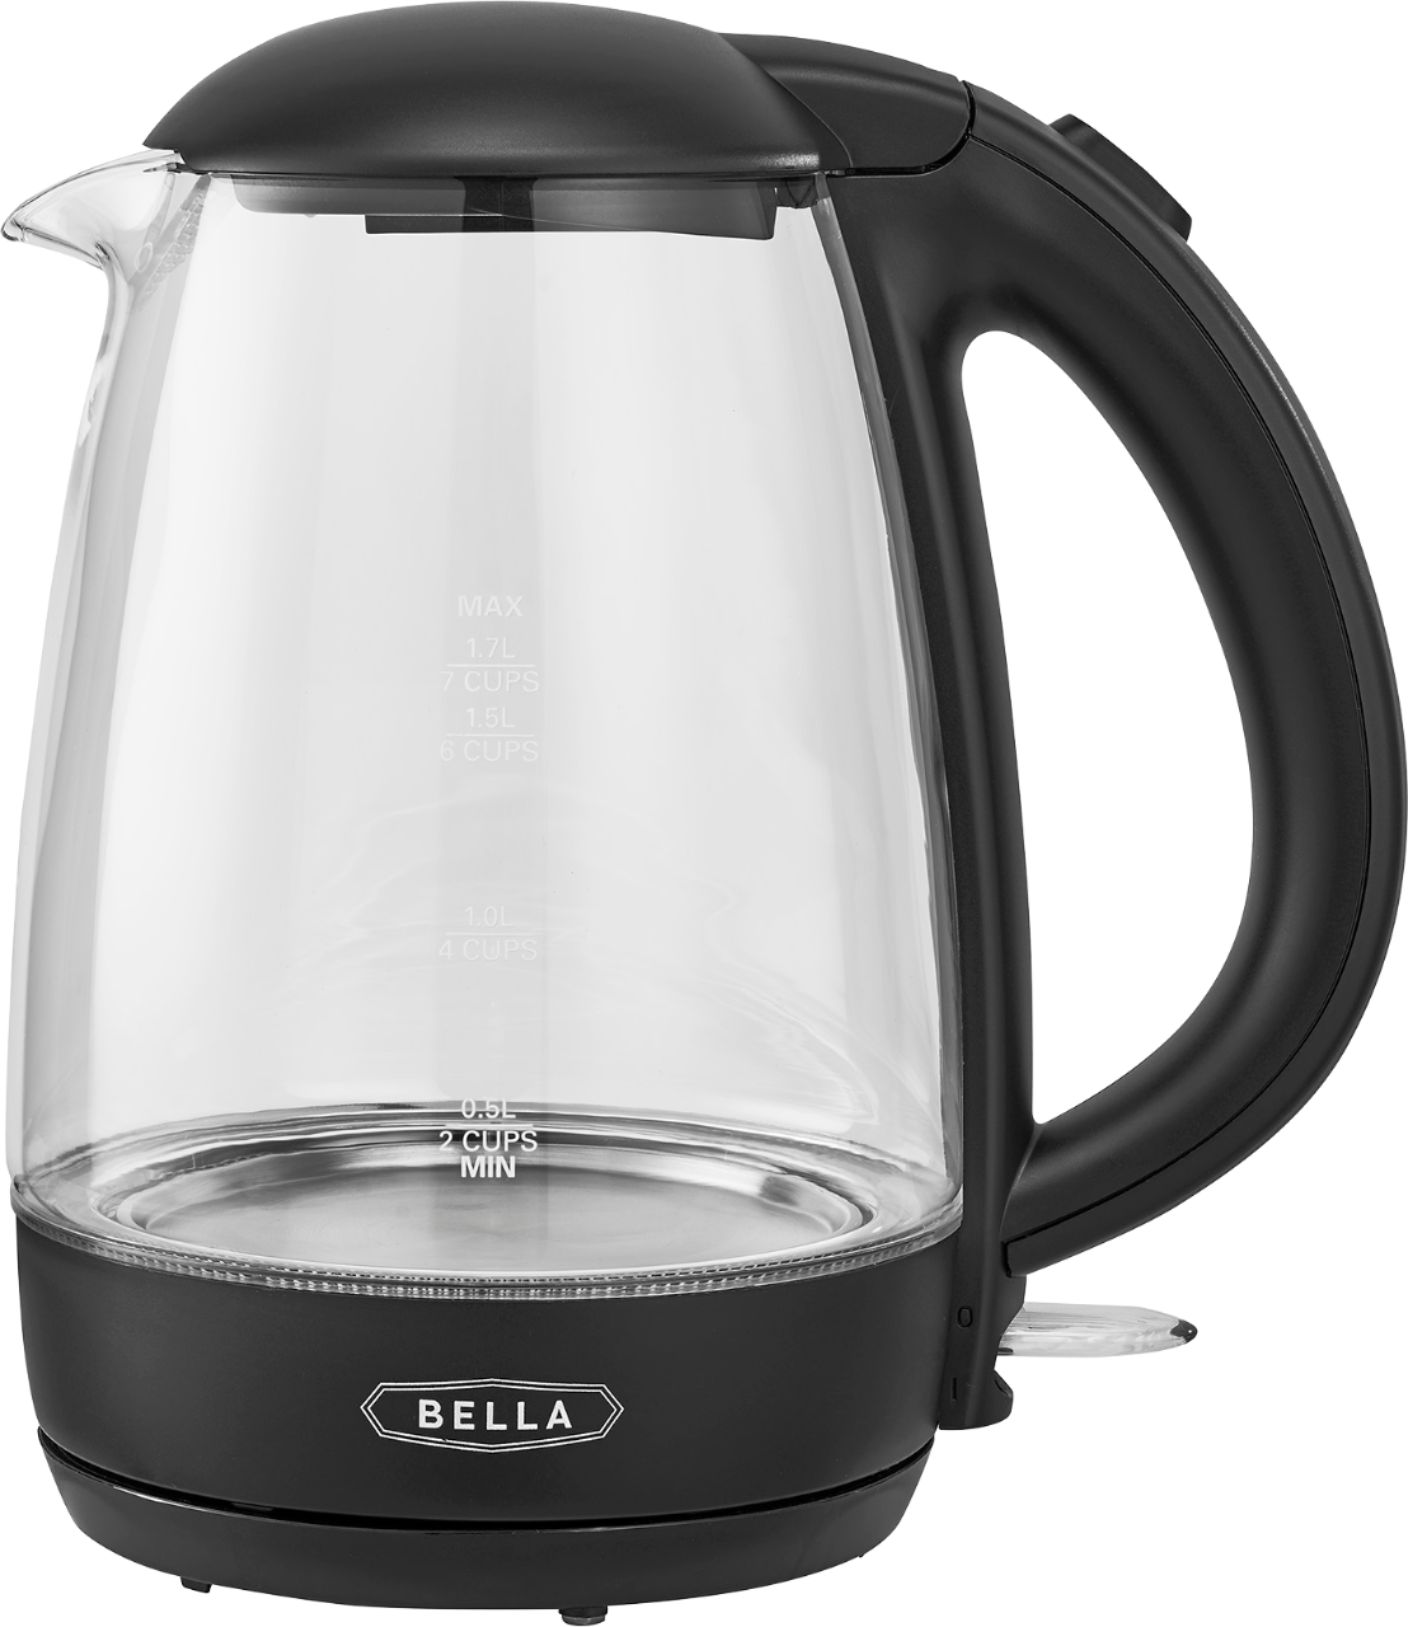 1.7L Bella Illuminated Electric Glass Kettle $18 + Free Store Pickup at Best Buy